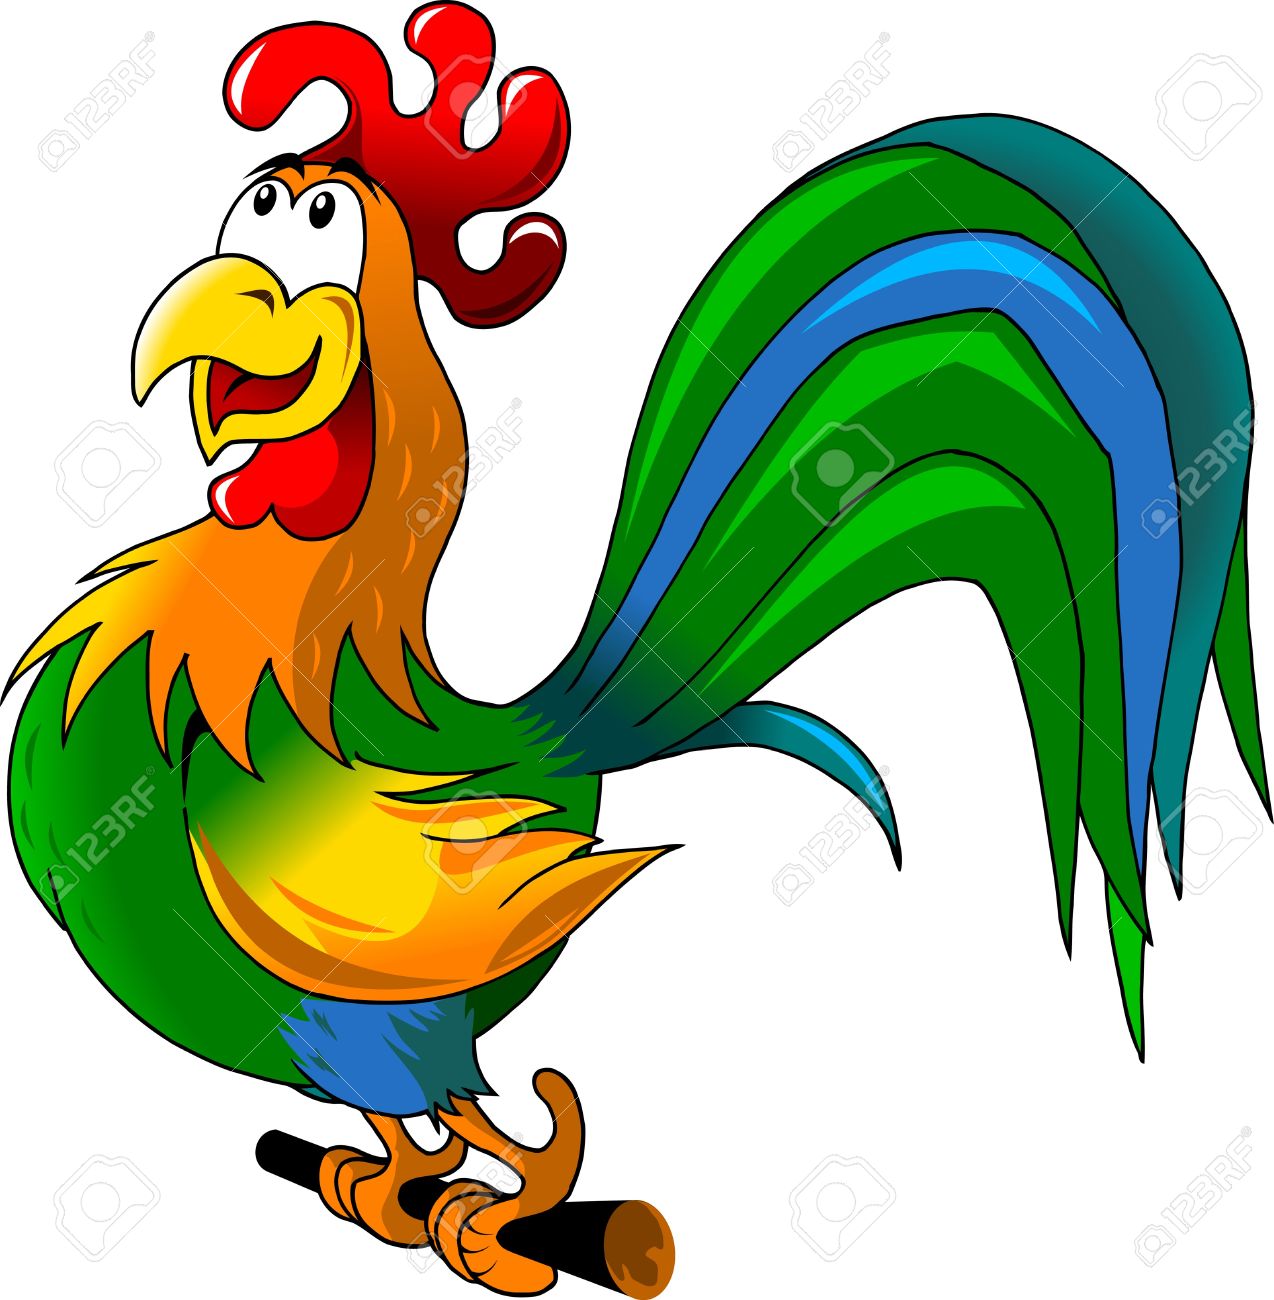 Rooster clip art rooster clipart fans 6